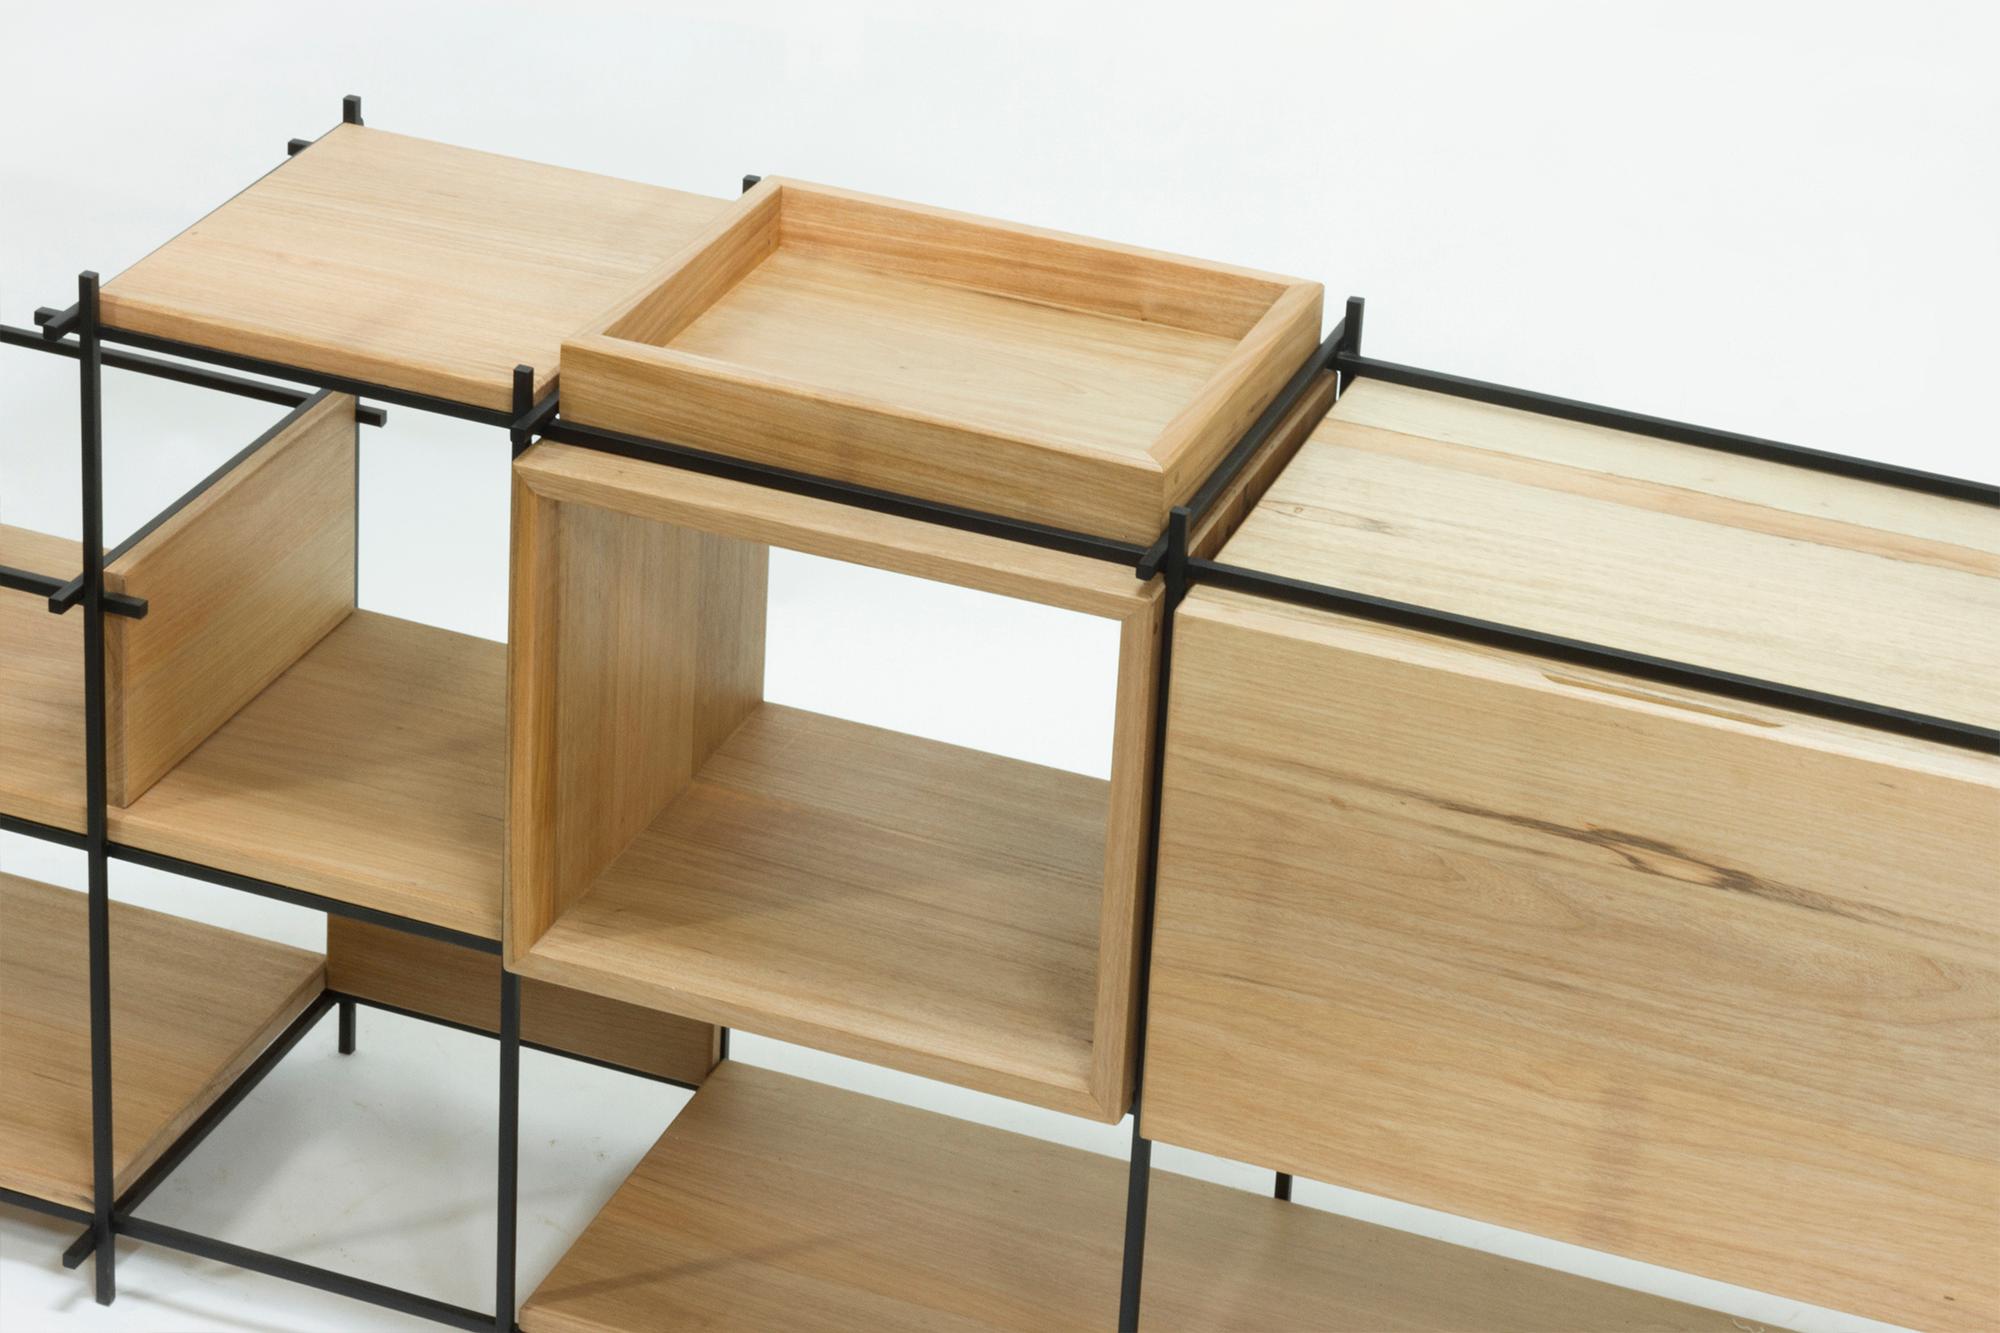 Sideboard in Hardwood and Steel, Brazilian Contemporary Design by O Formigueiro For Sale 3